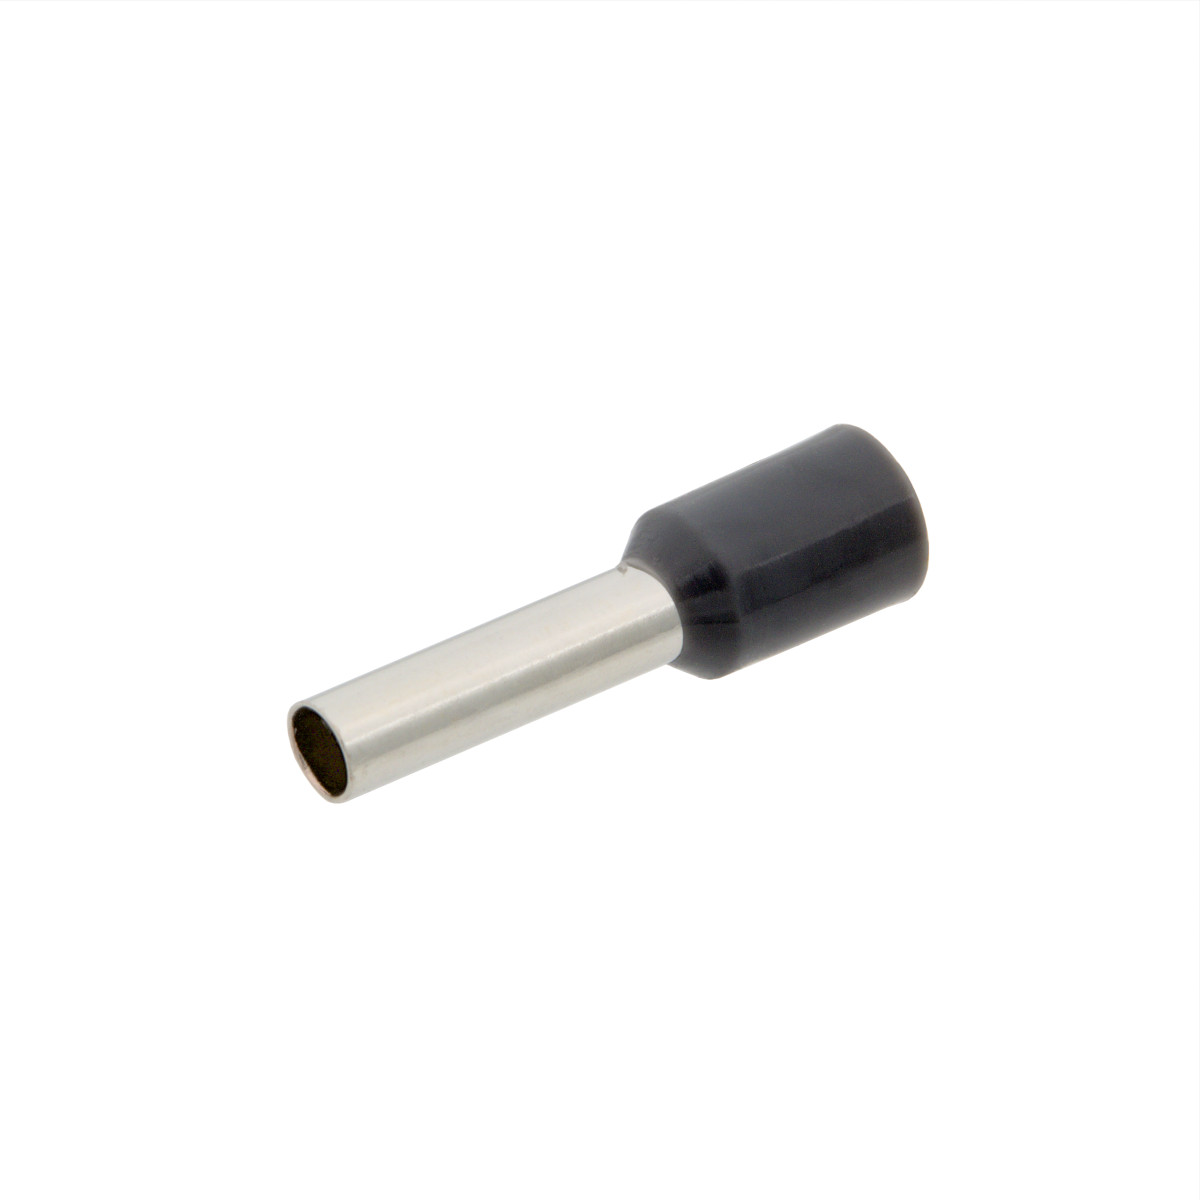 Insulated ferrule for 4.00mm² L12 [AWG 12] cable